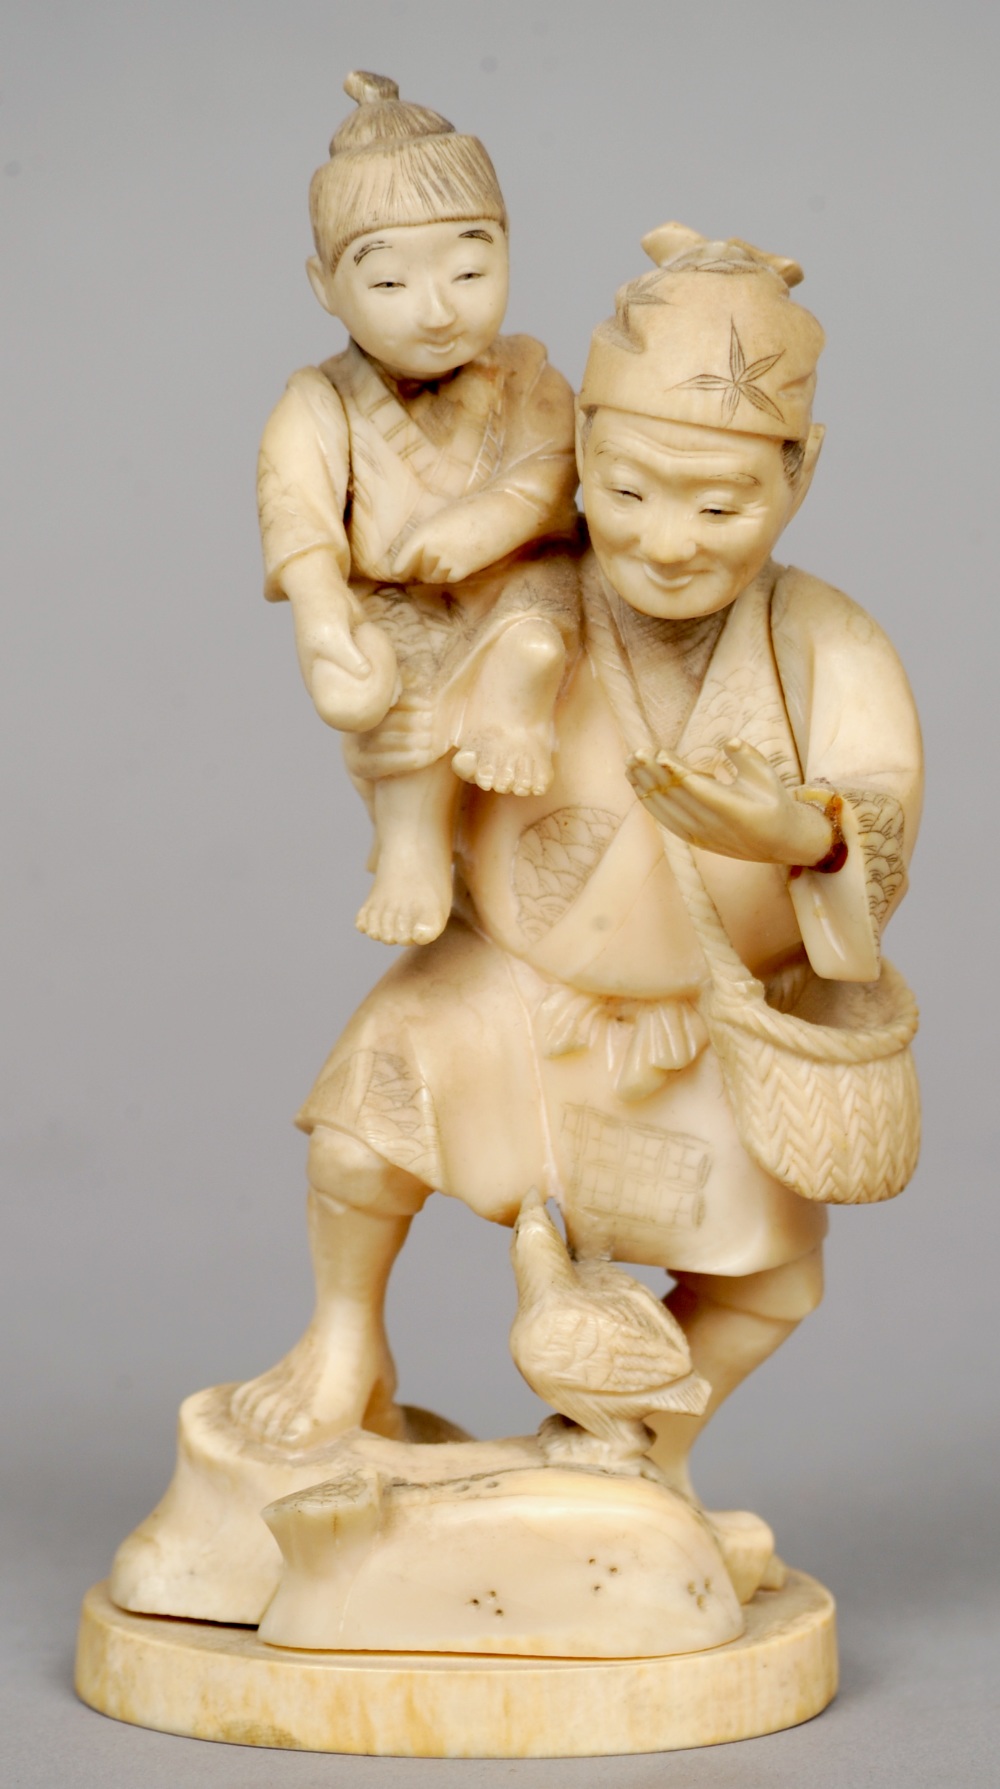 A 19th century Japanese ivory okimono
Formed as a father carrying his son on his shoulder, a small